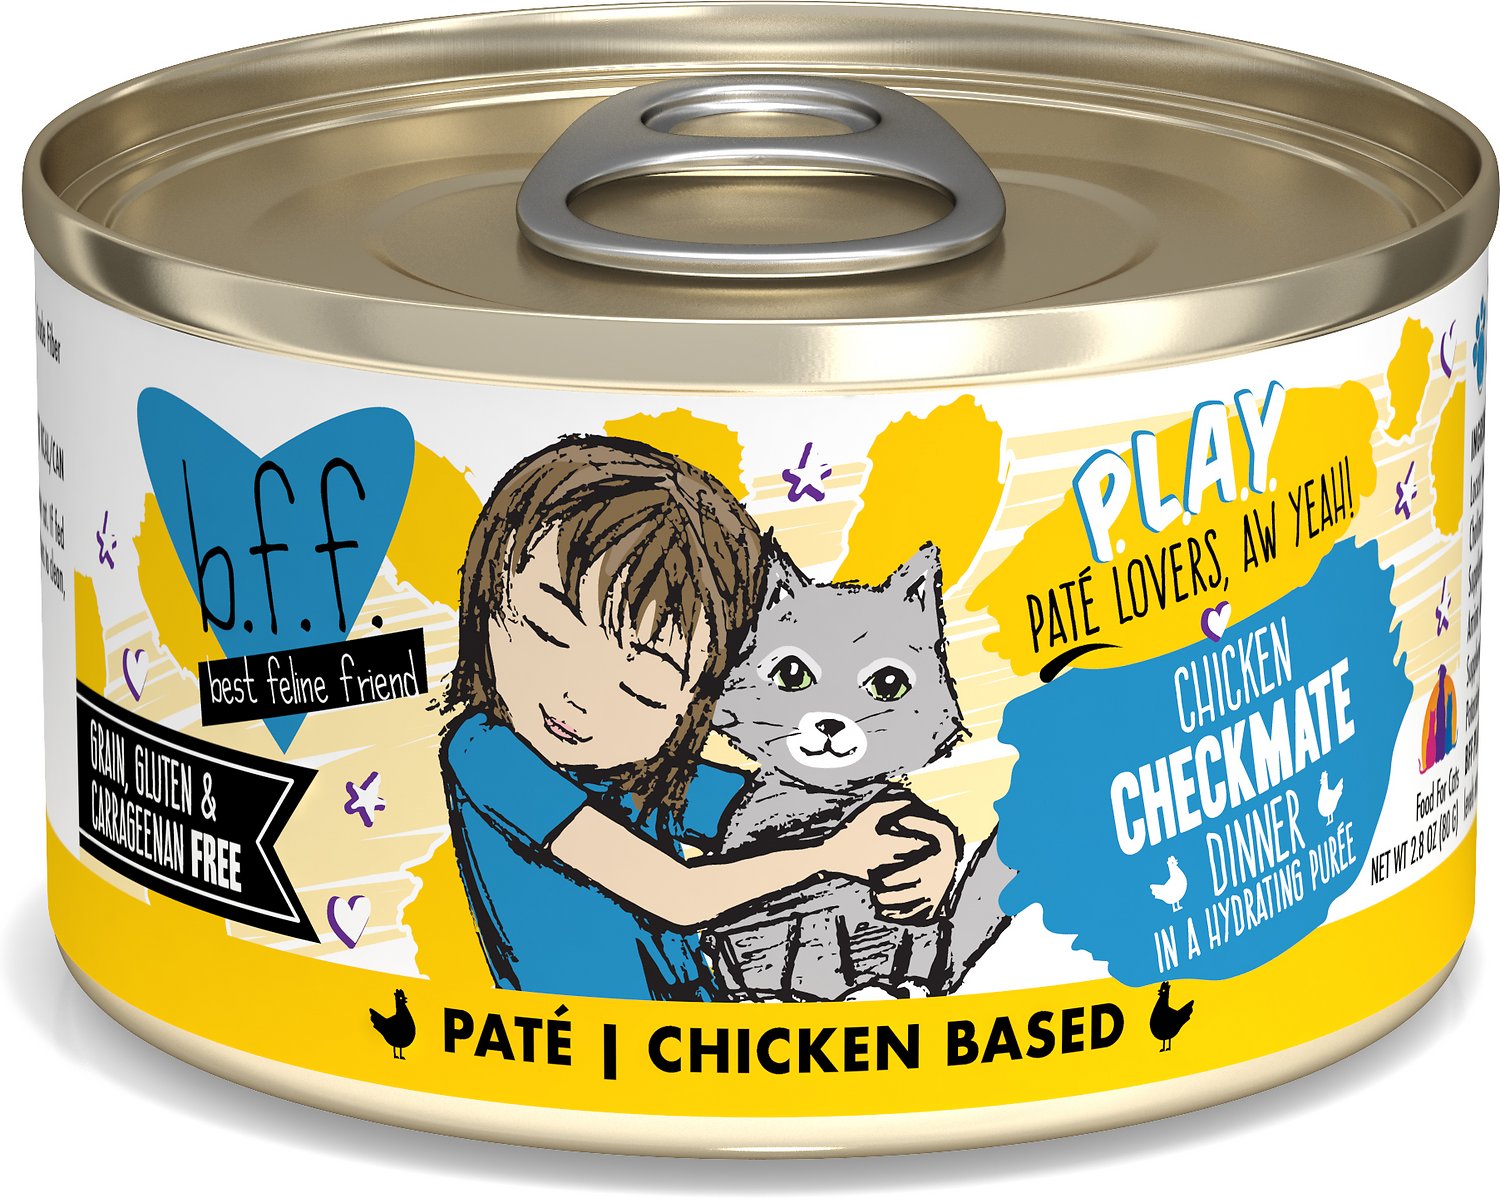 Weruva BFF PLAY Checkmate Chicken Dinner in a Hydrating Puree Pate Wet Cat  Food, (12) 2.8 oz Cans